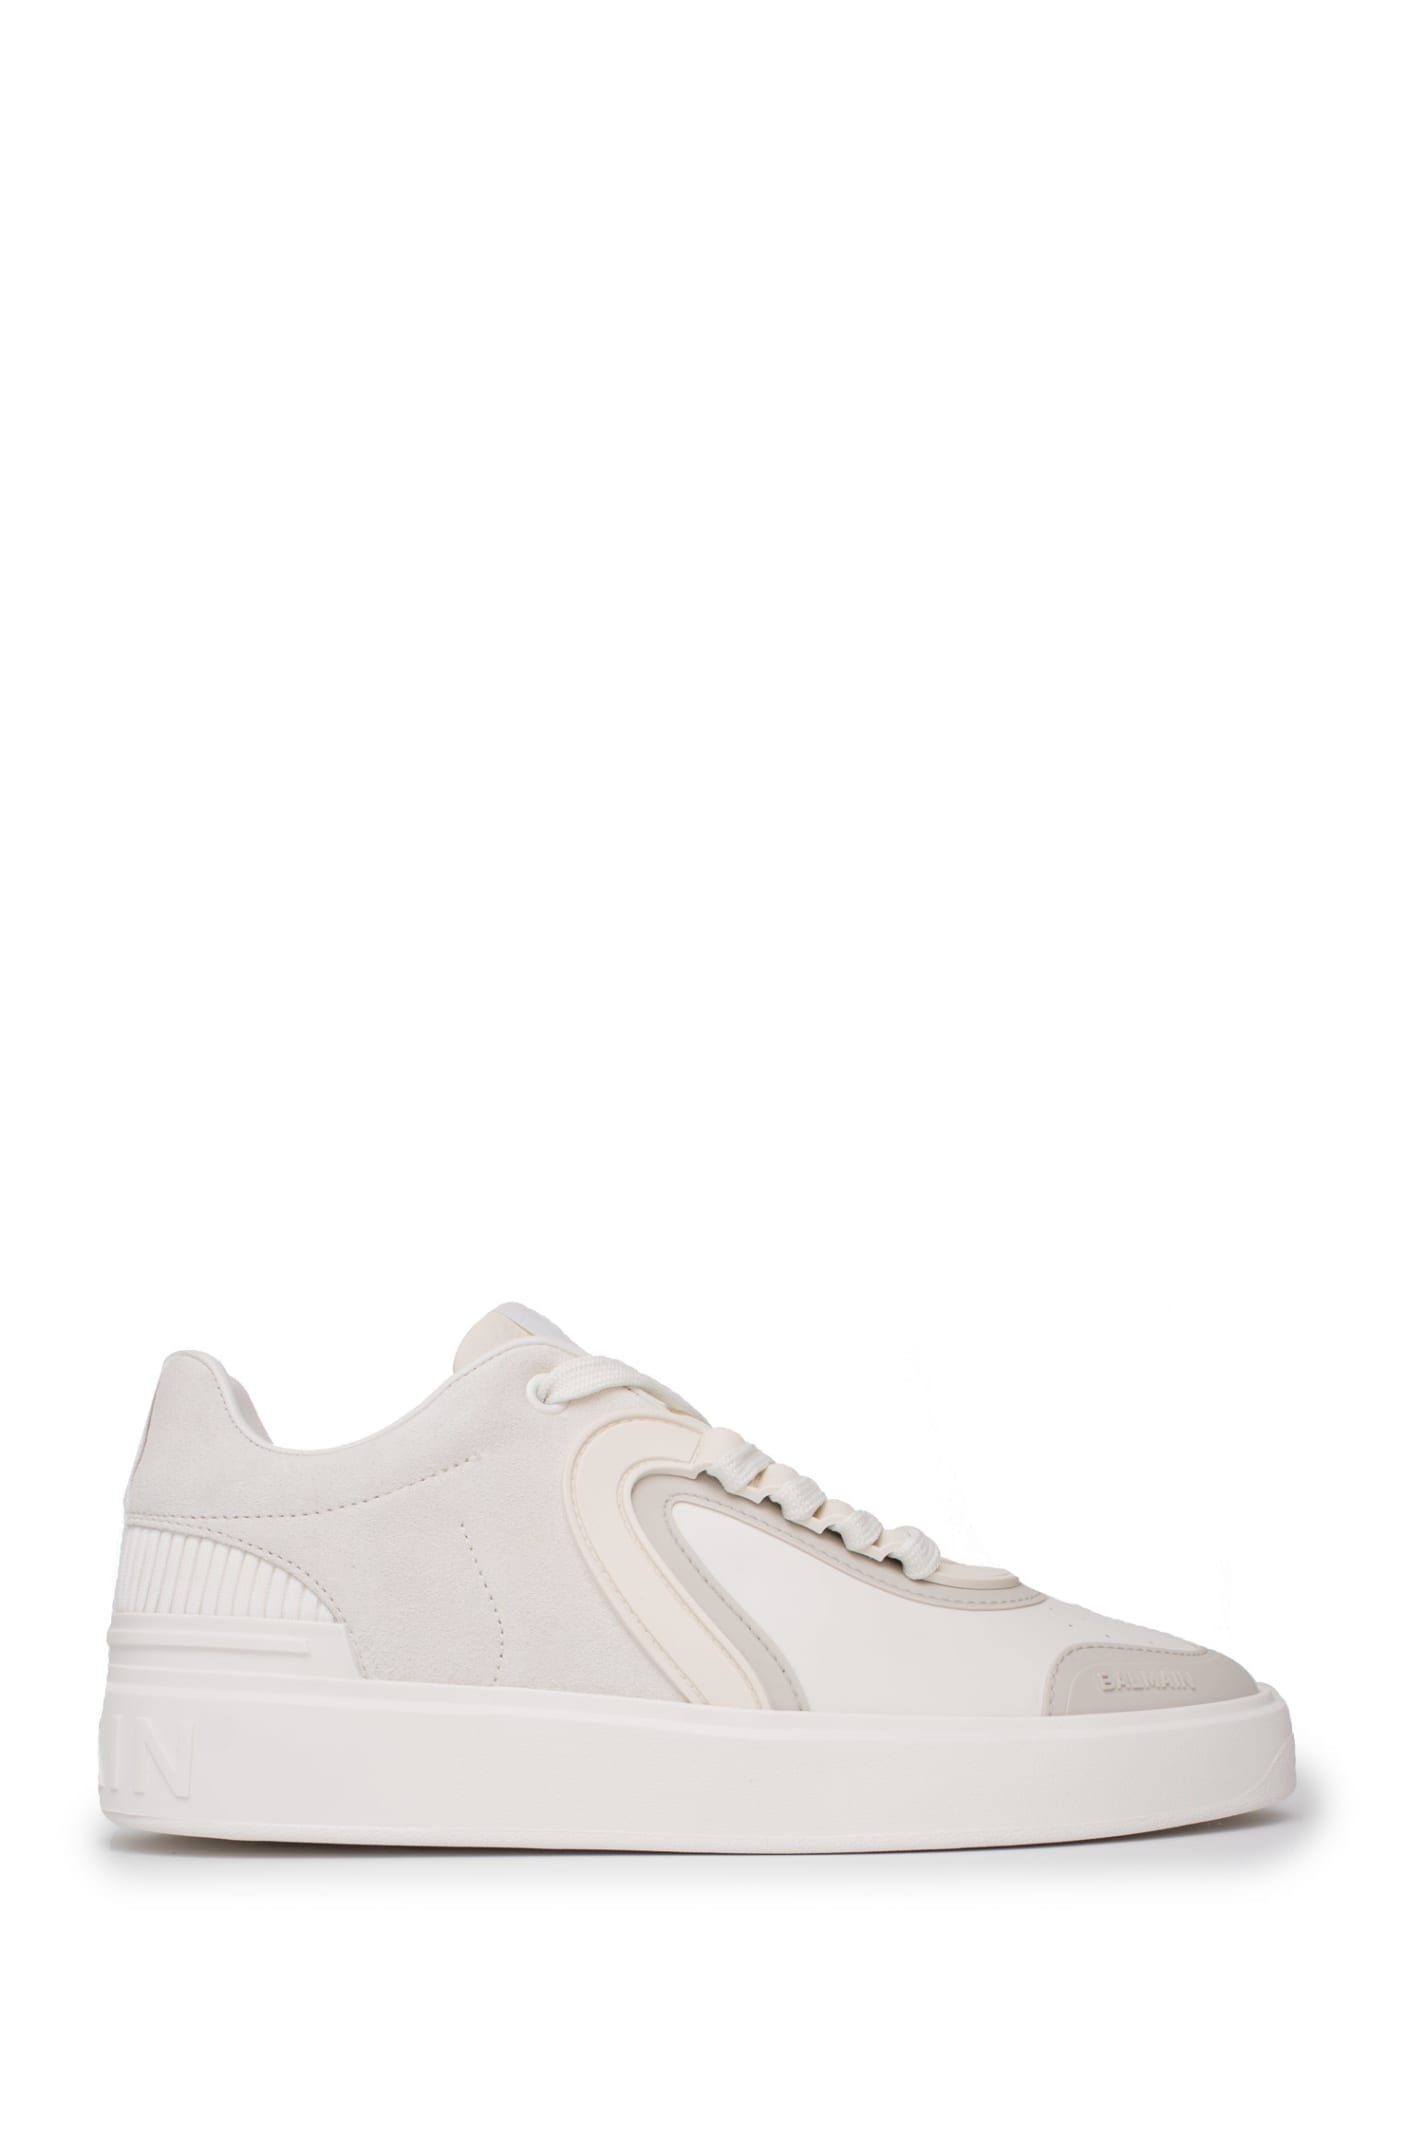 Balmain White Leather And Suede B-skaete Sneakers